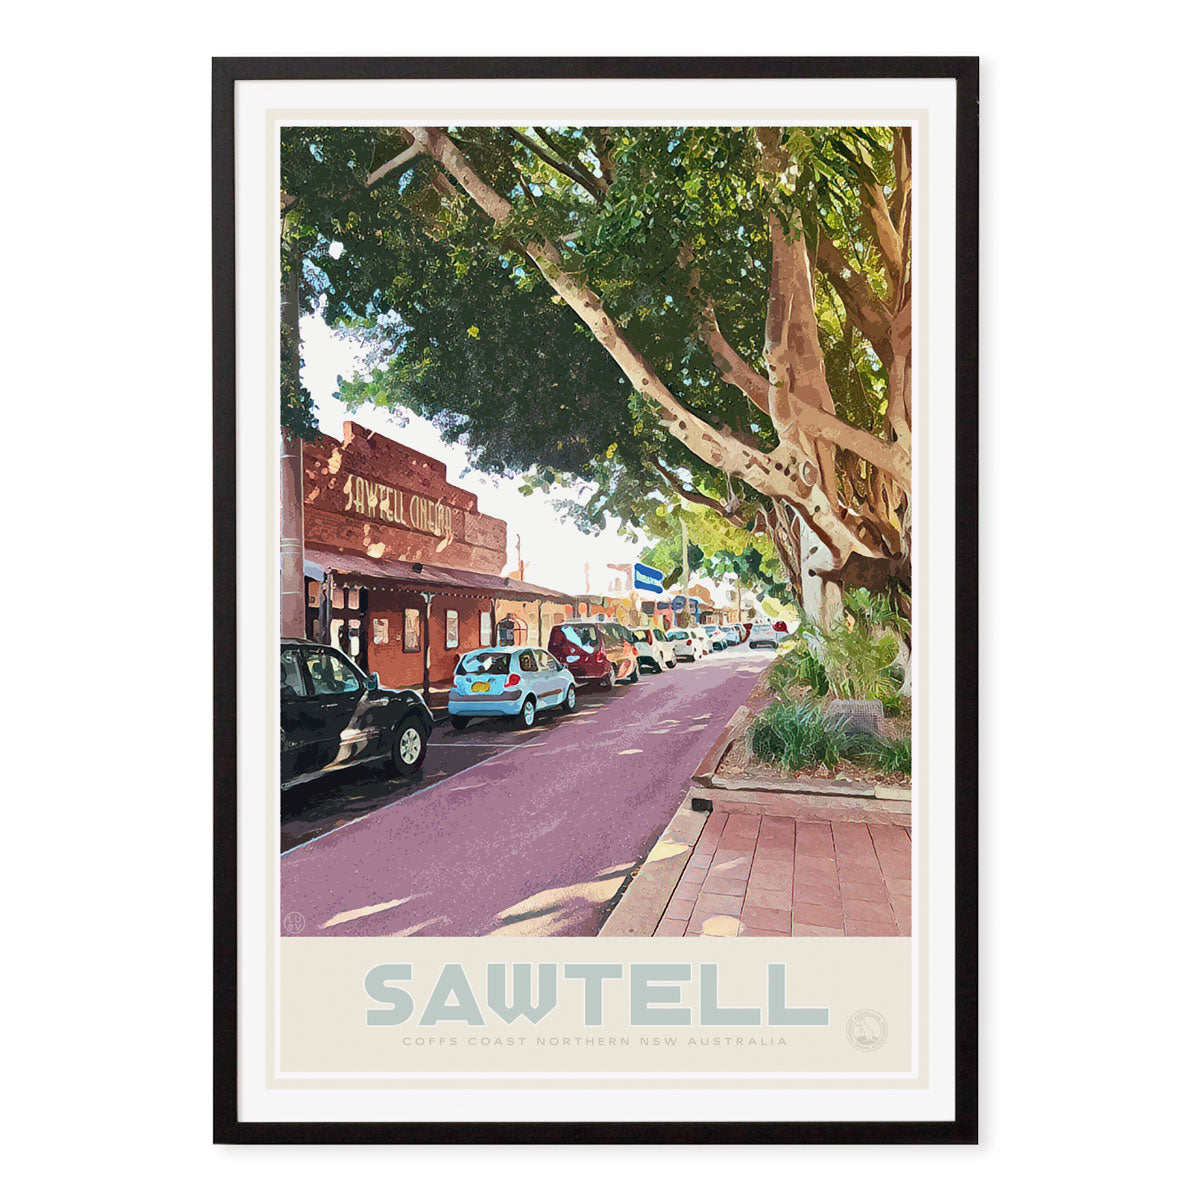 Sawtell retro vintage travel poster print in black frame from Places We Luv